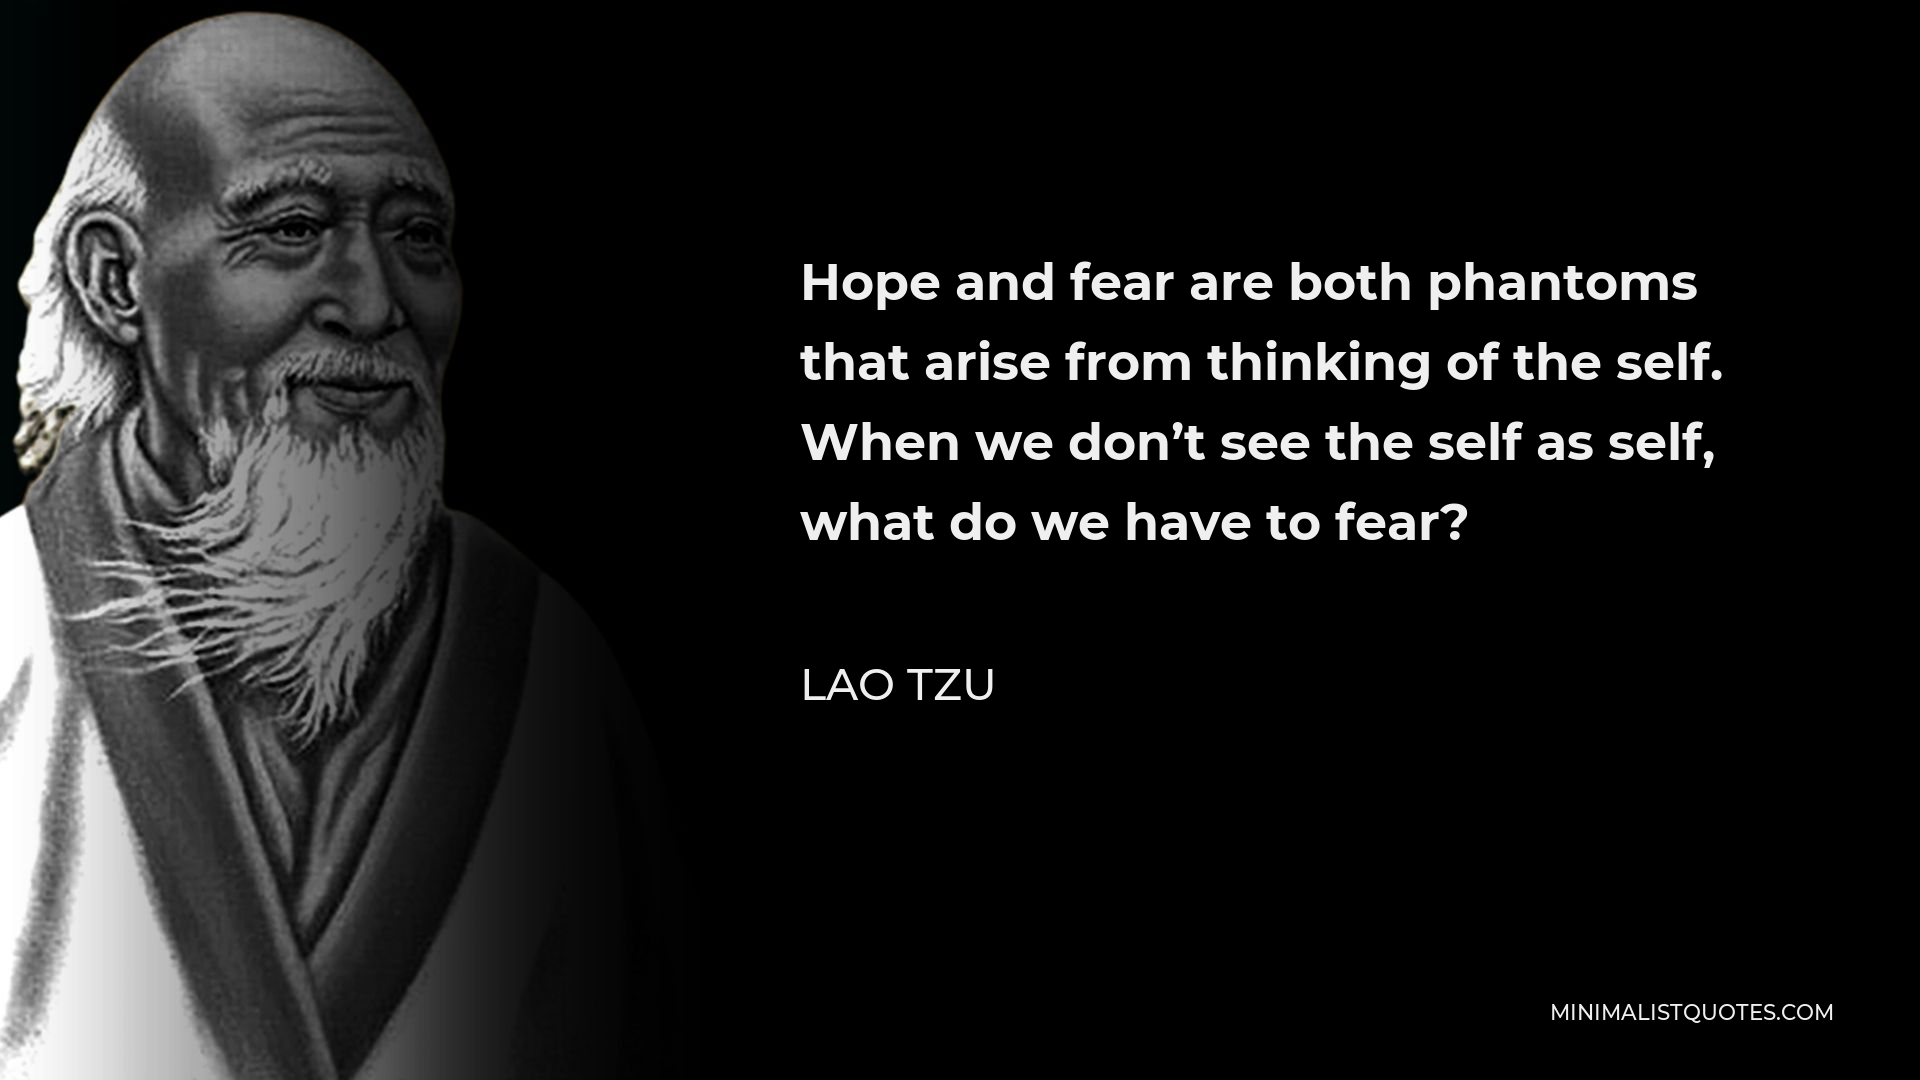 Lao Tzu Quote - Hope and fear are both phantoms that arise from thinking of the self. When we don’t see the self as self, what do we have to fear?